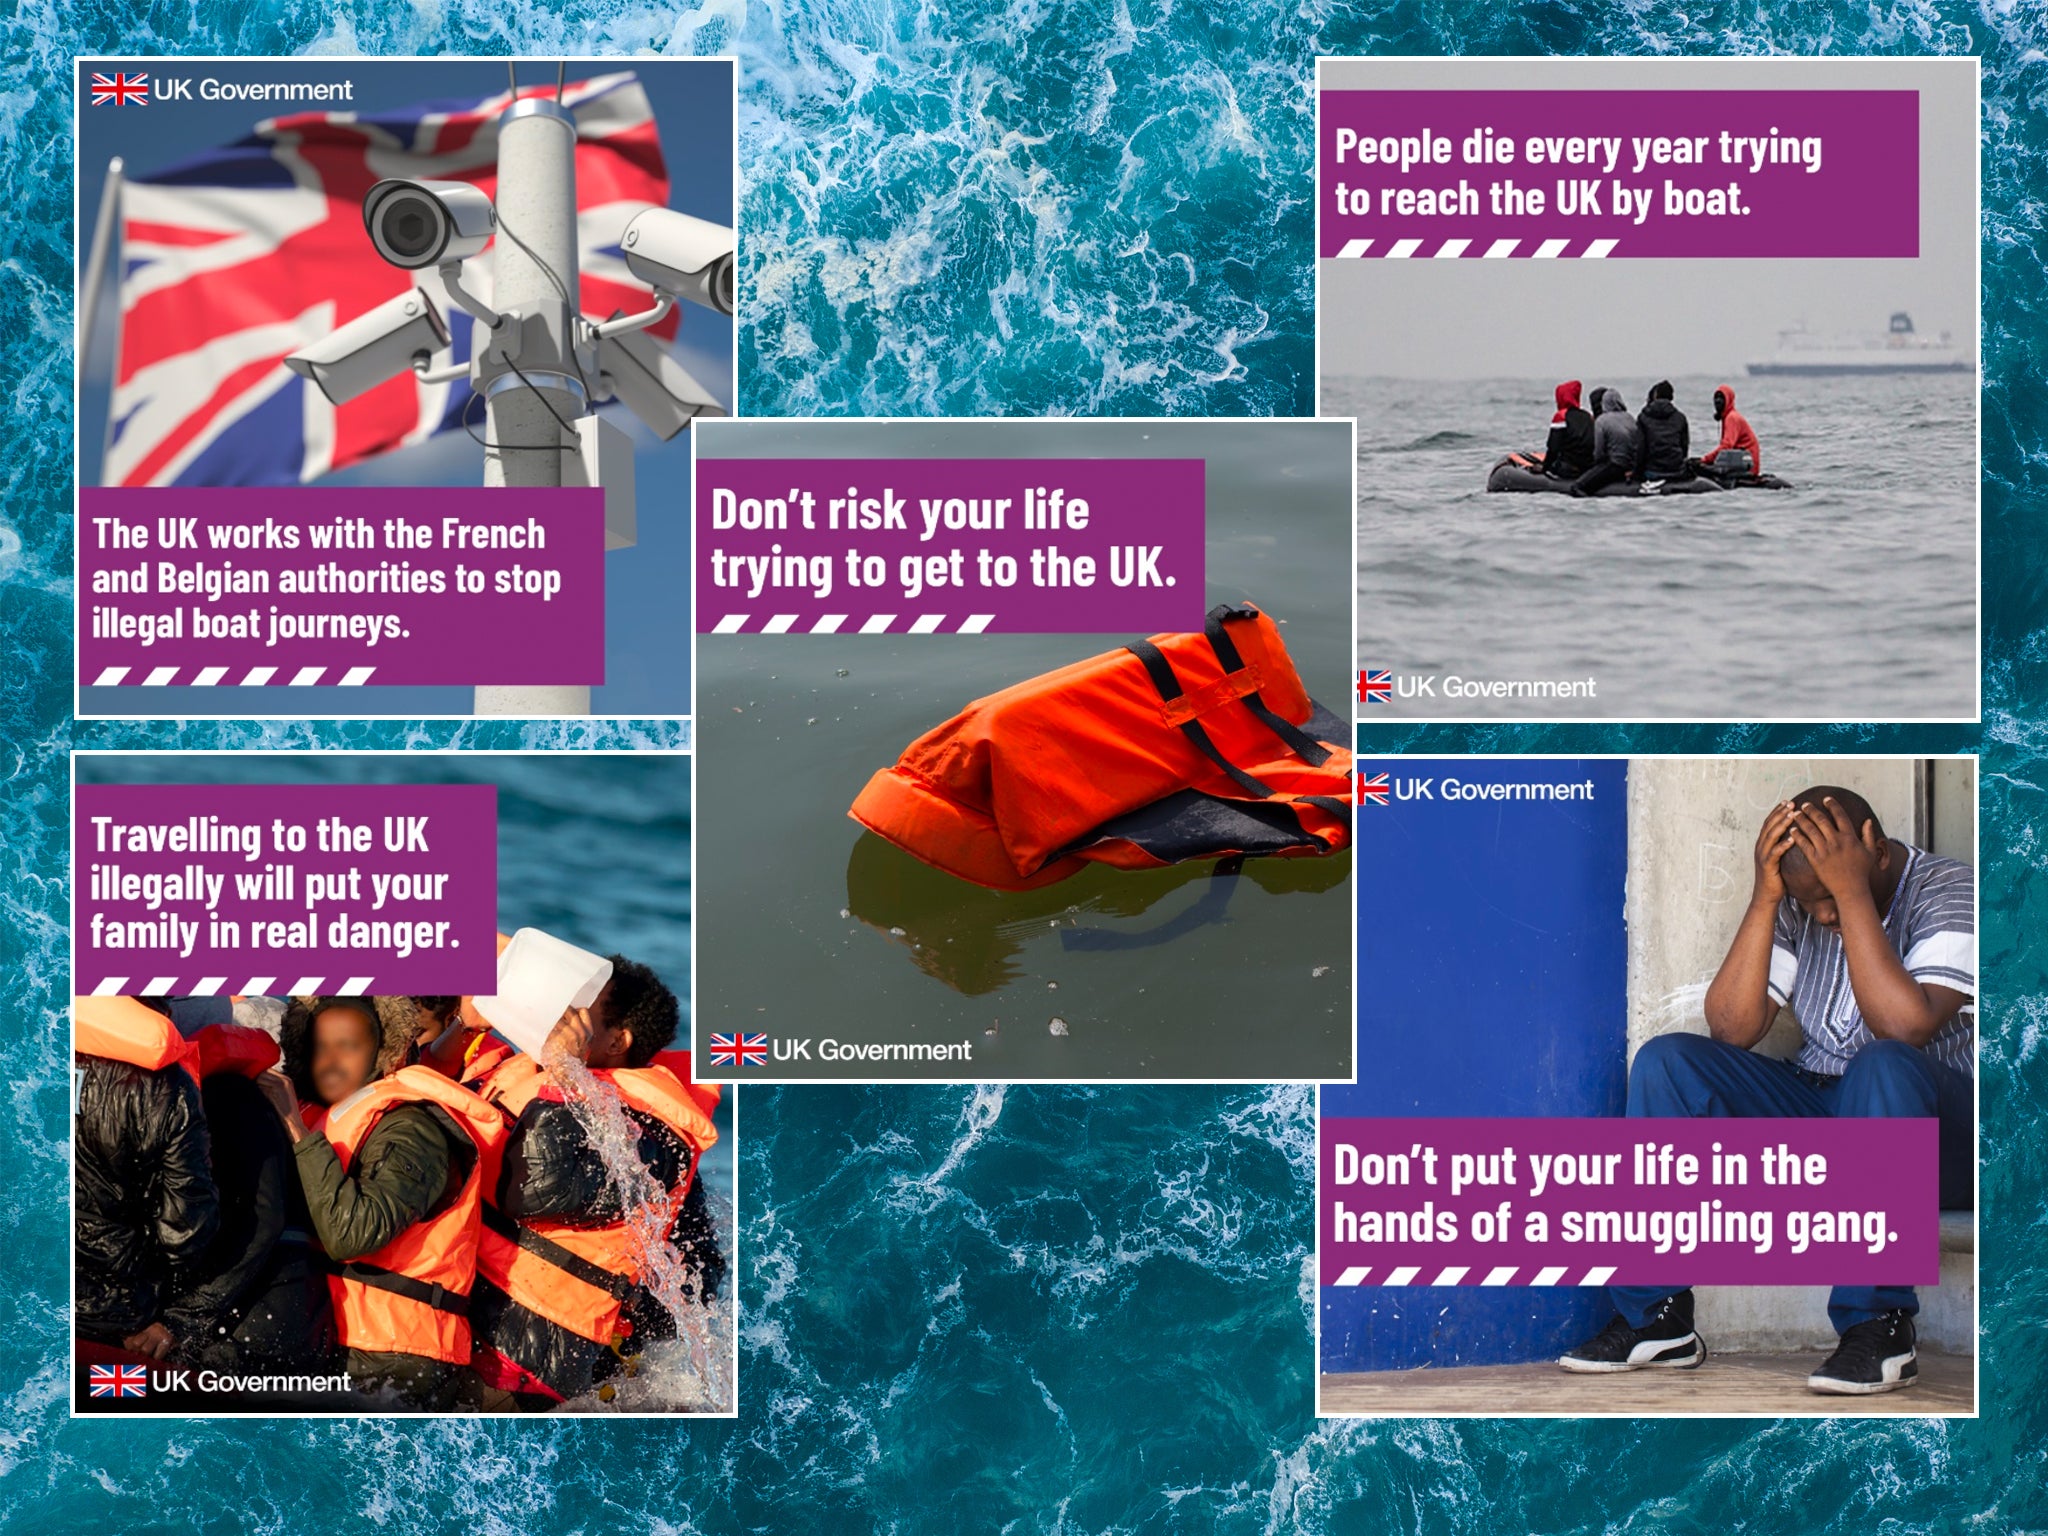 Home Office spends £90k on 3 months of social media adverts to 'deter'  Channel migrants – but numbers rocket | The Independent